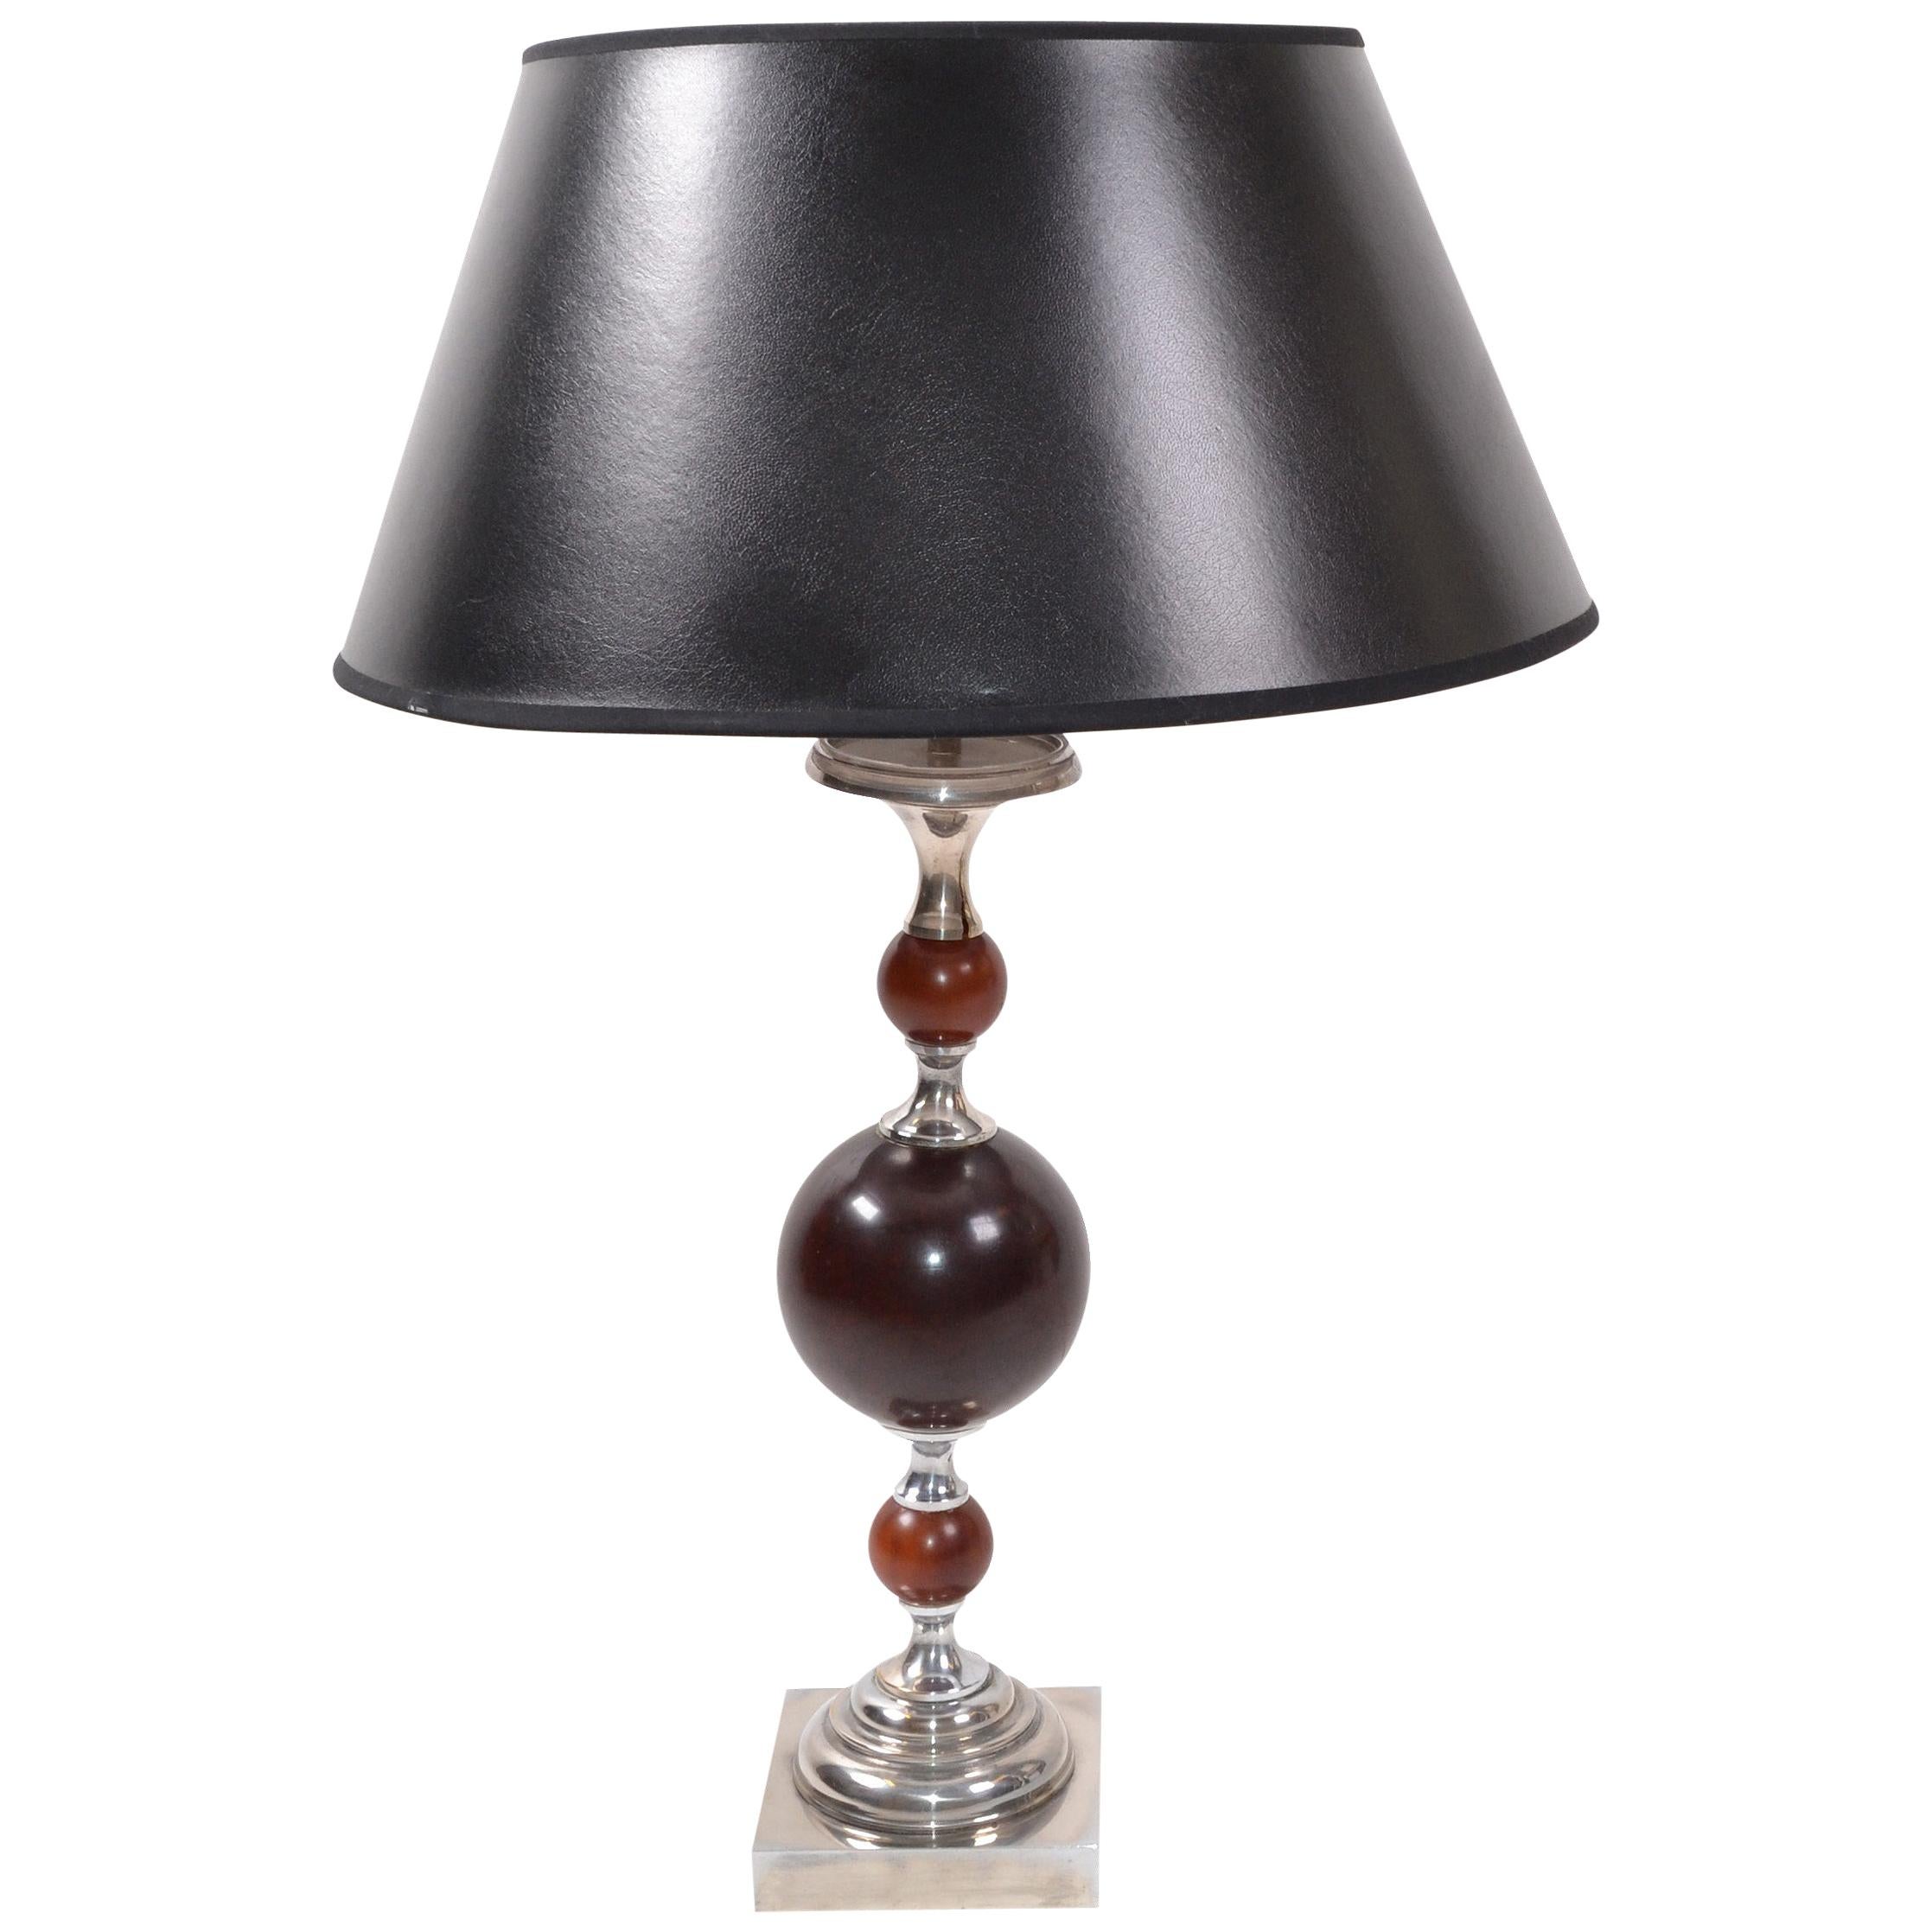 Art Deco Maison Charles style French 3 Burgundy Spheres Nickel-Plated Table Lamp